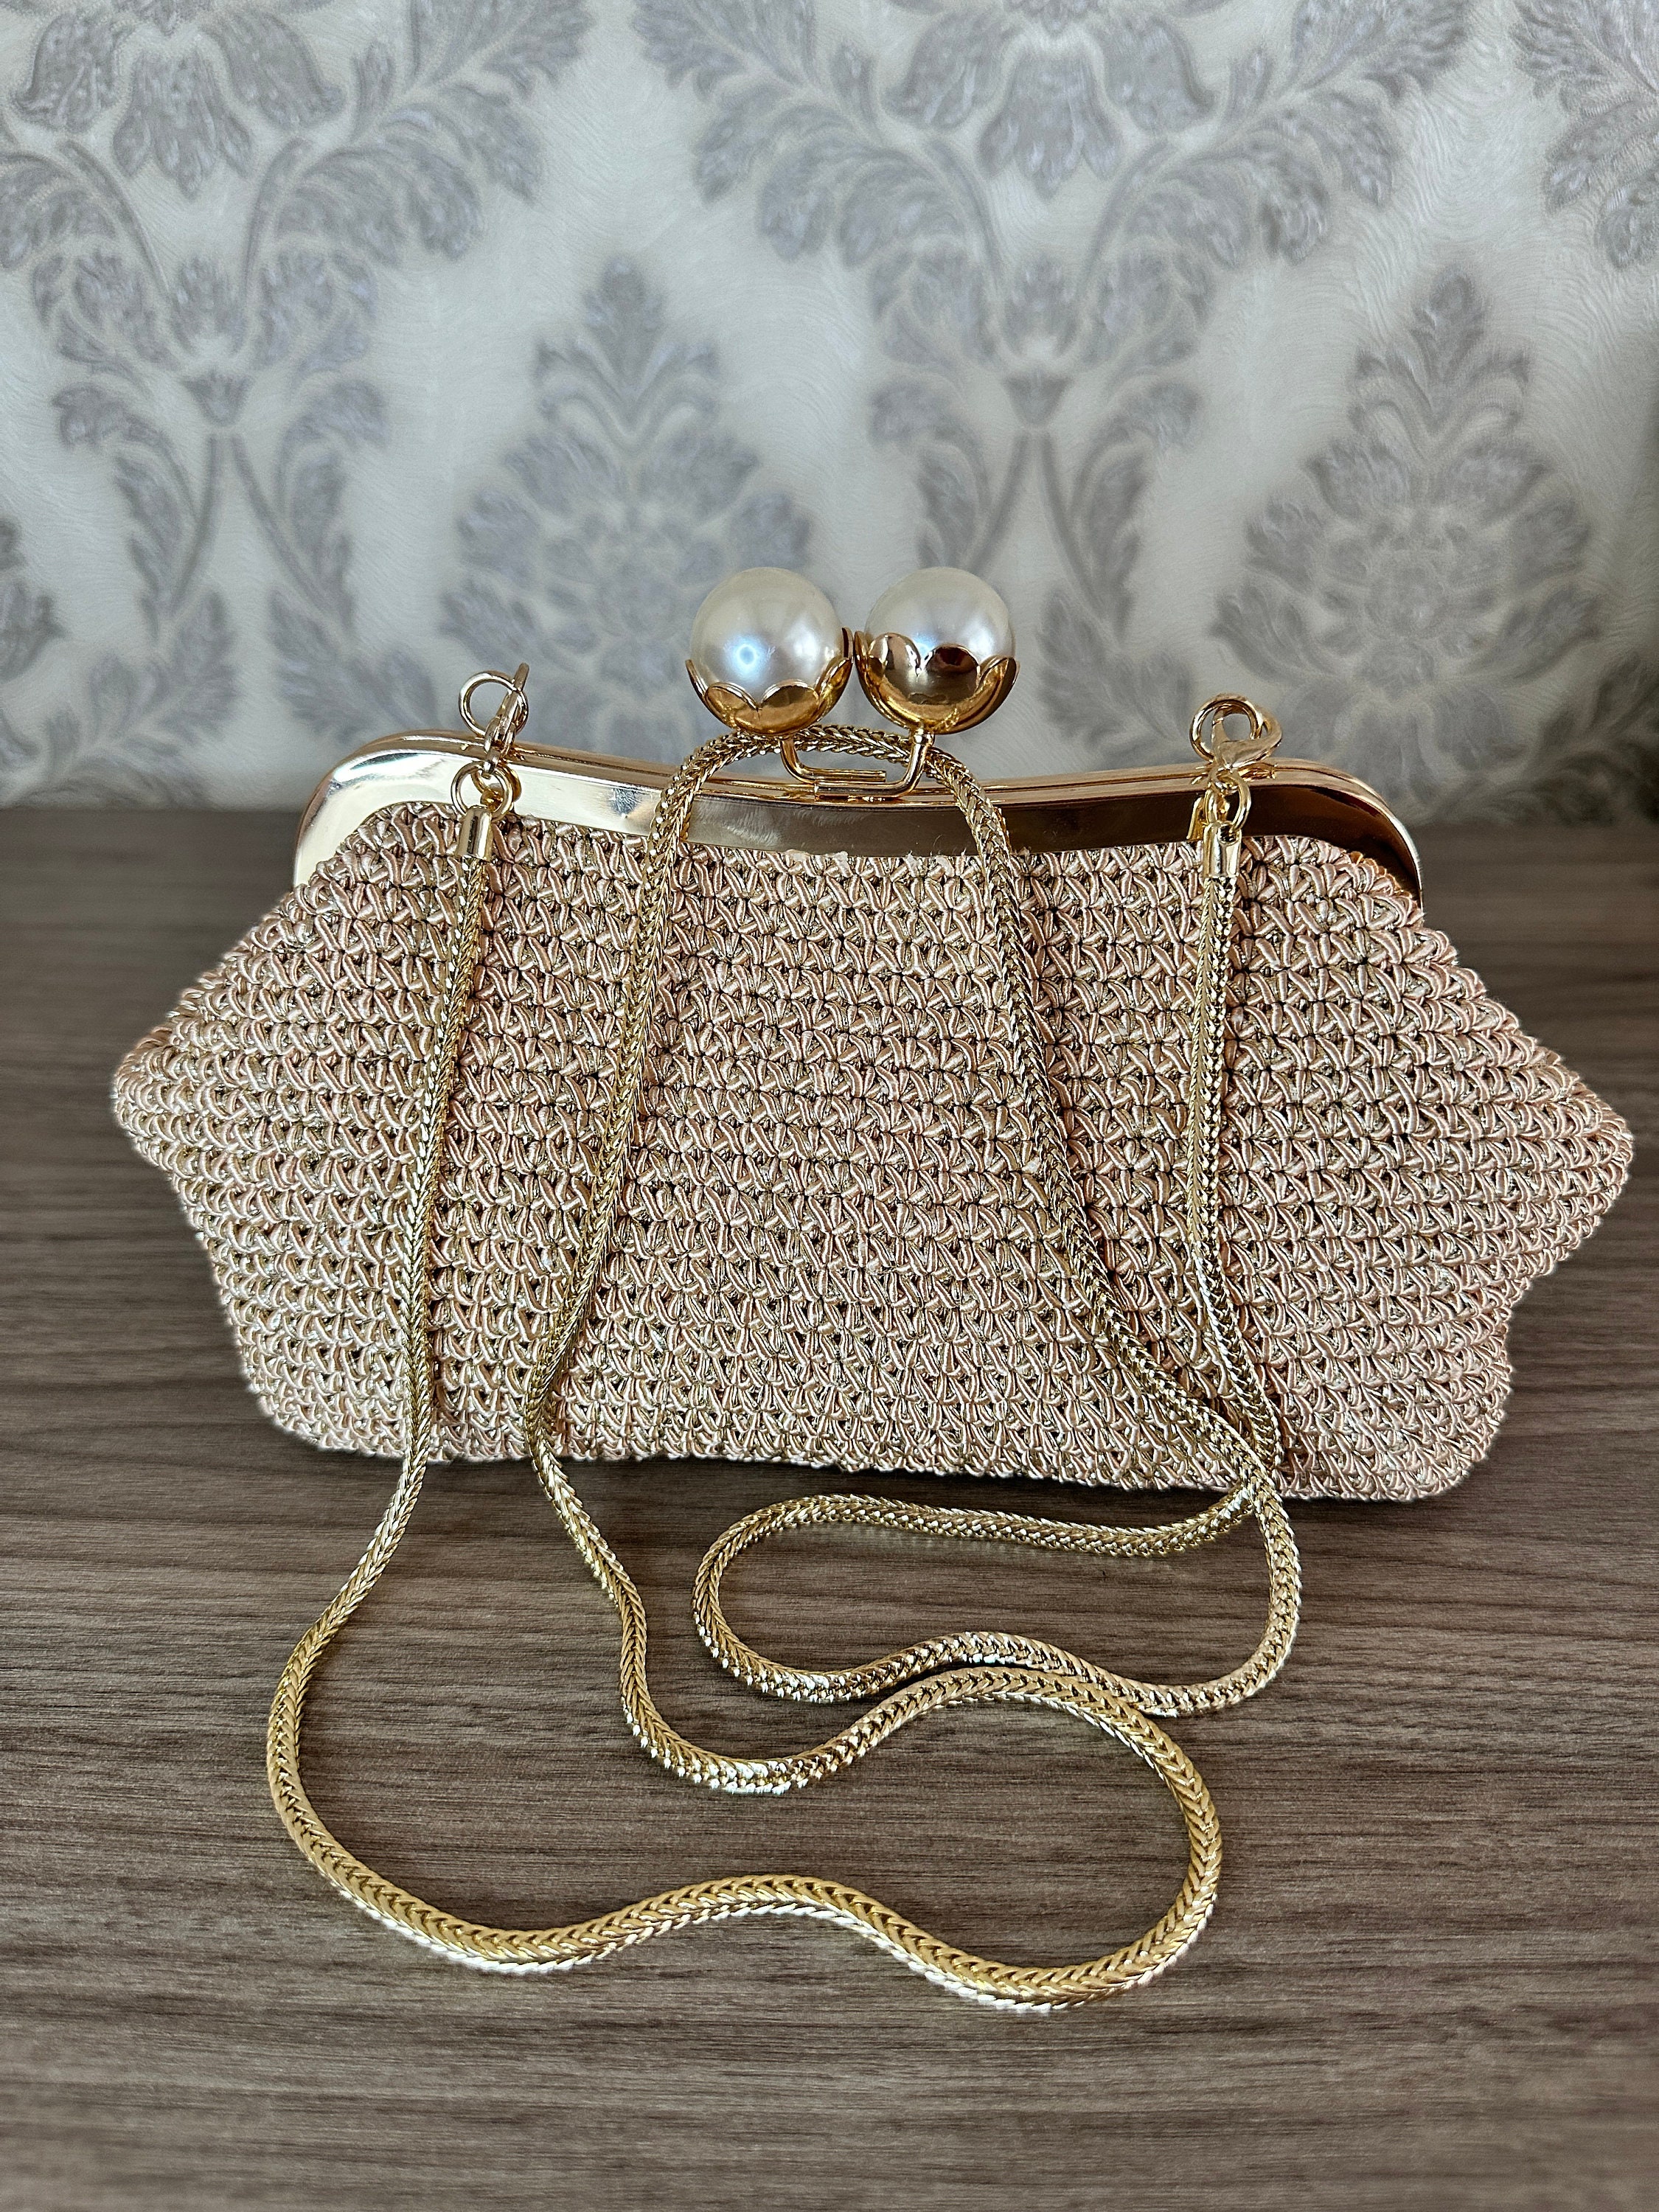 THE TOP KNOTT Luxury White Pearl Purses Shoulder Bag for Women Pearl Bag  Crossbody Beaded Clutch Evening Bag : Amazon.in: Fashion